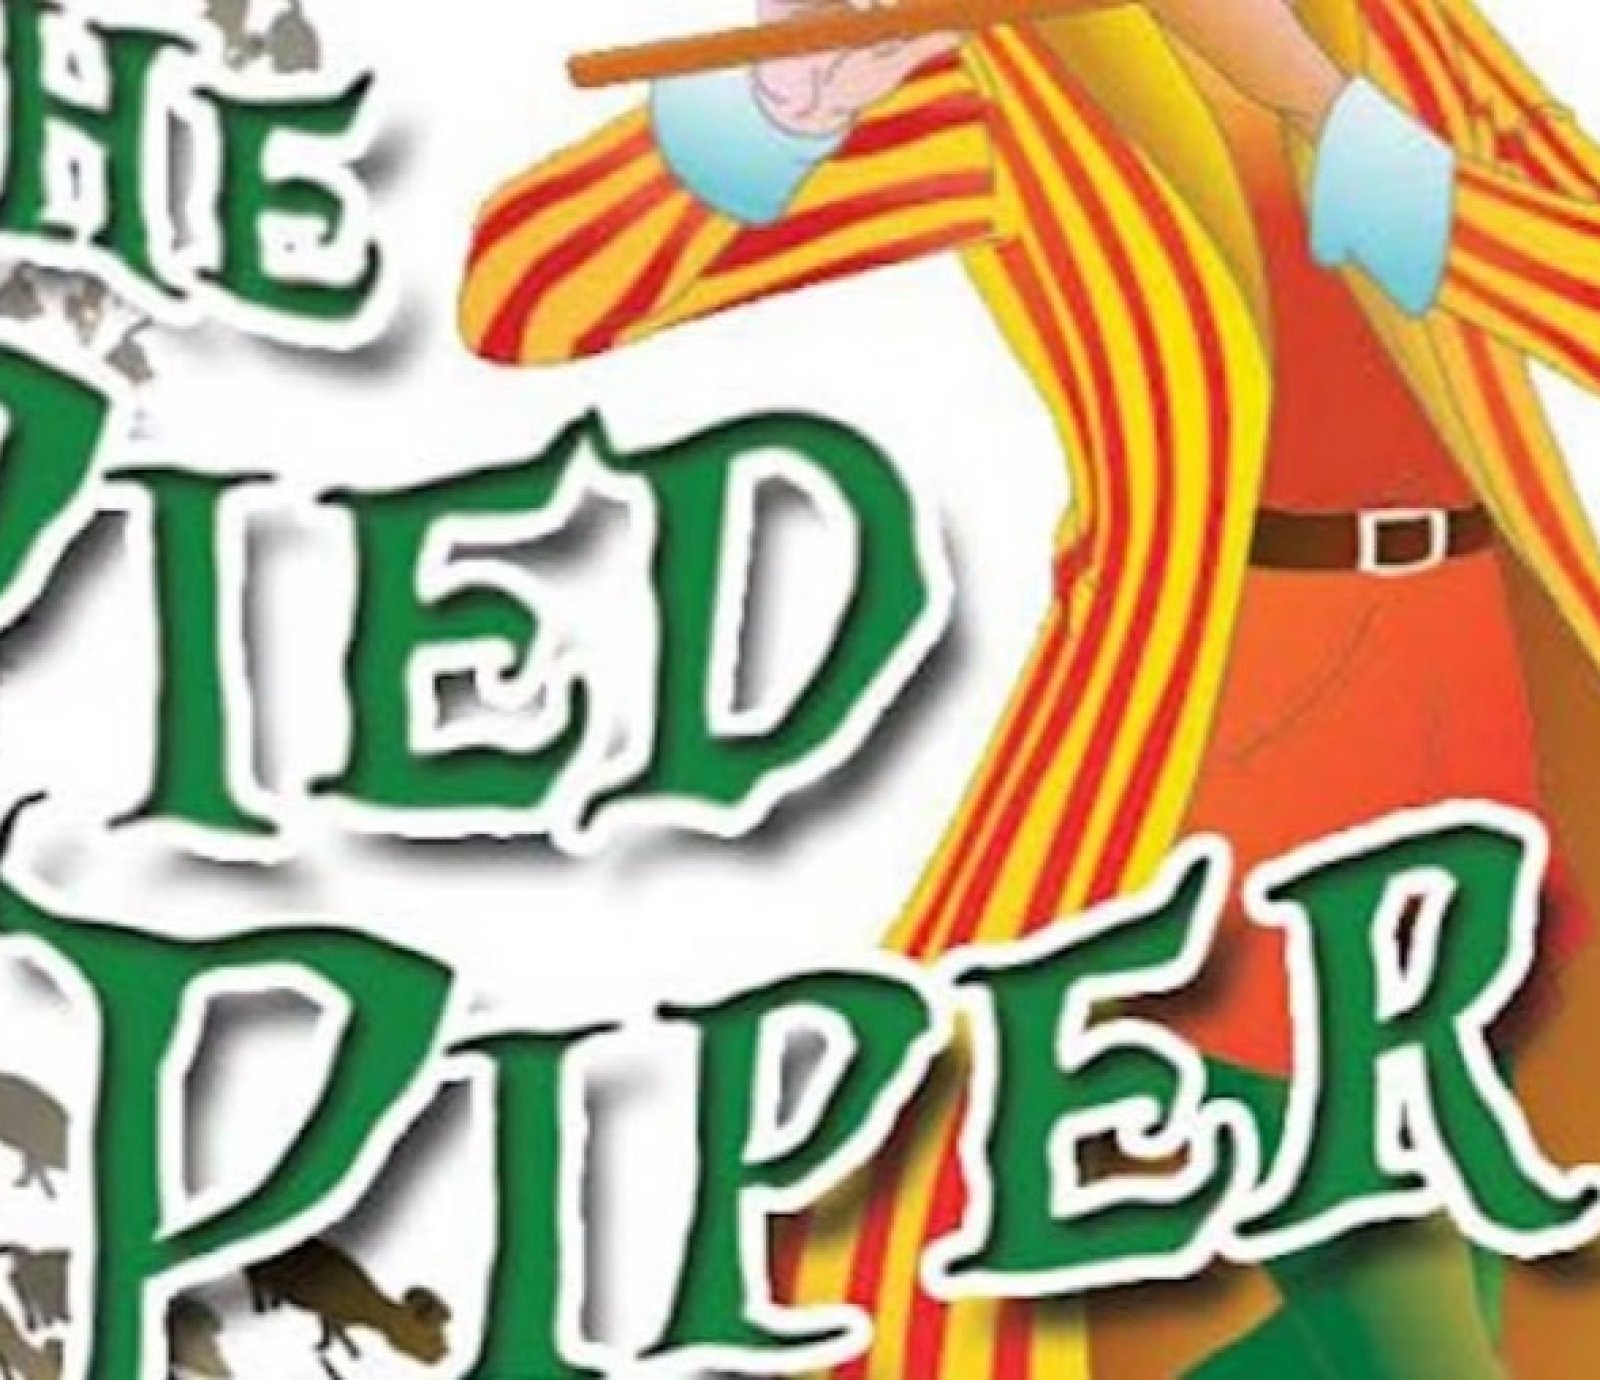 '53 Drama Group presents - The Pied Piper